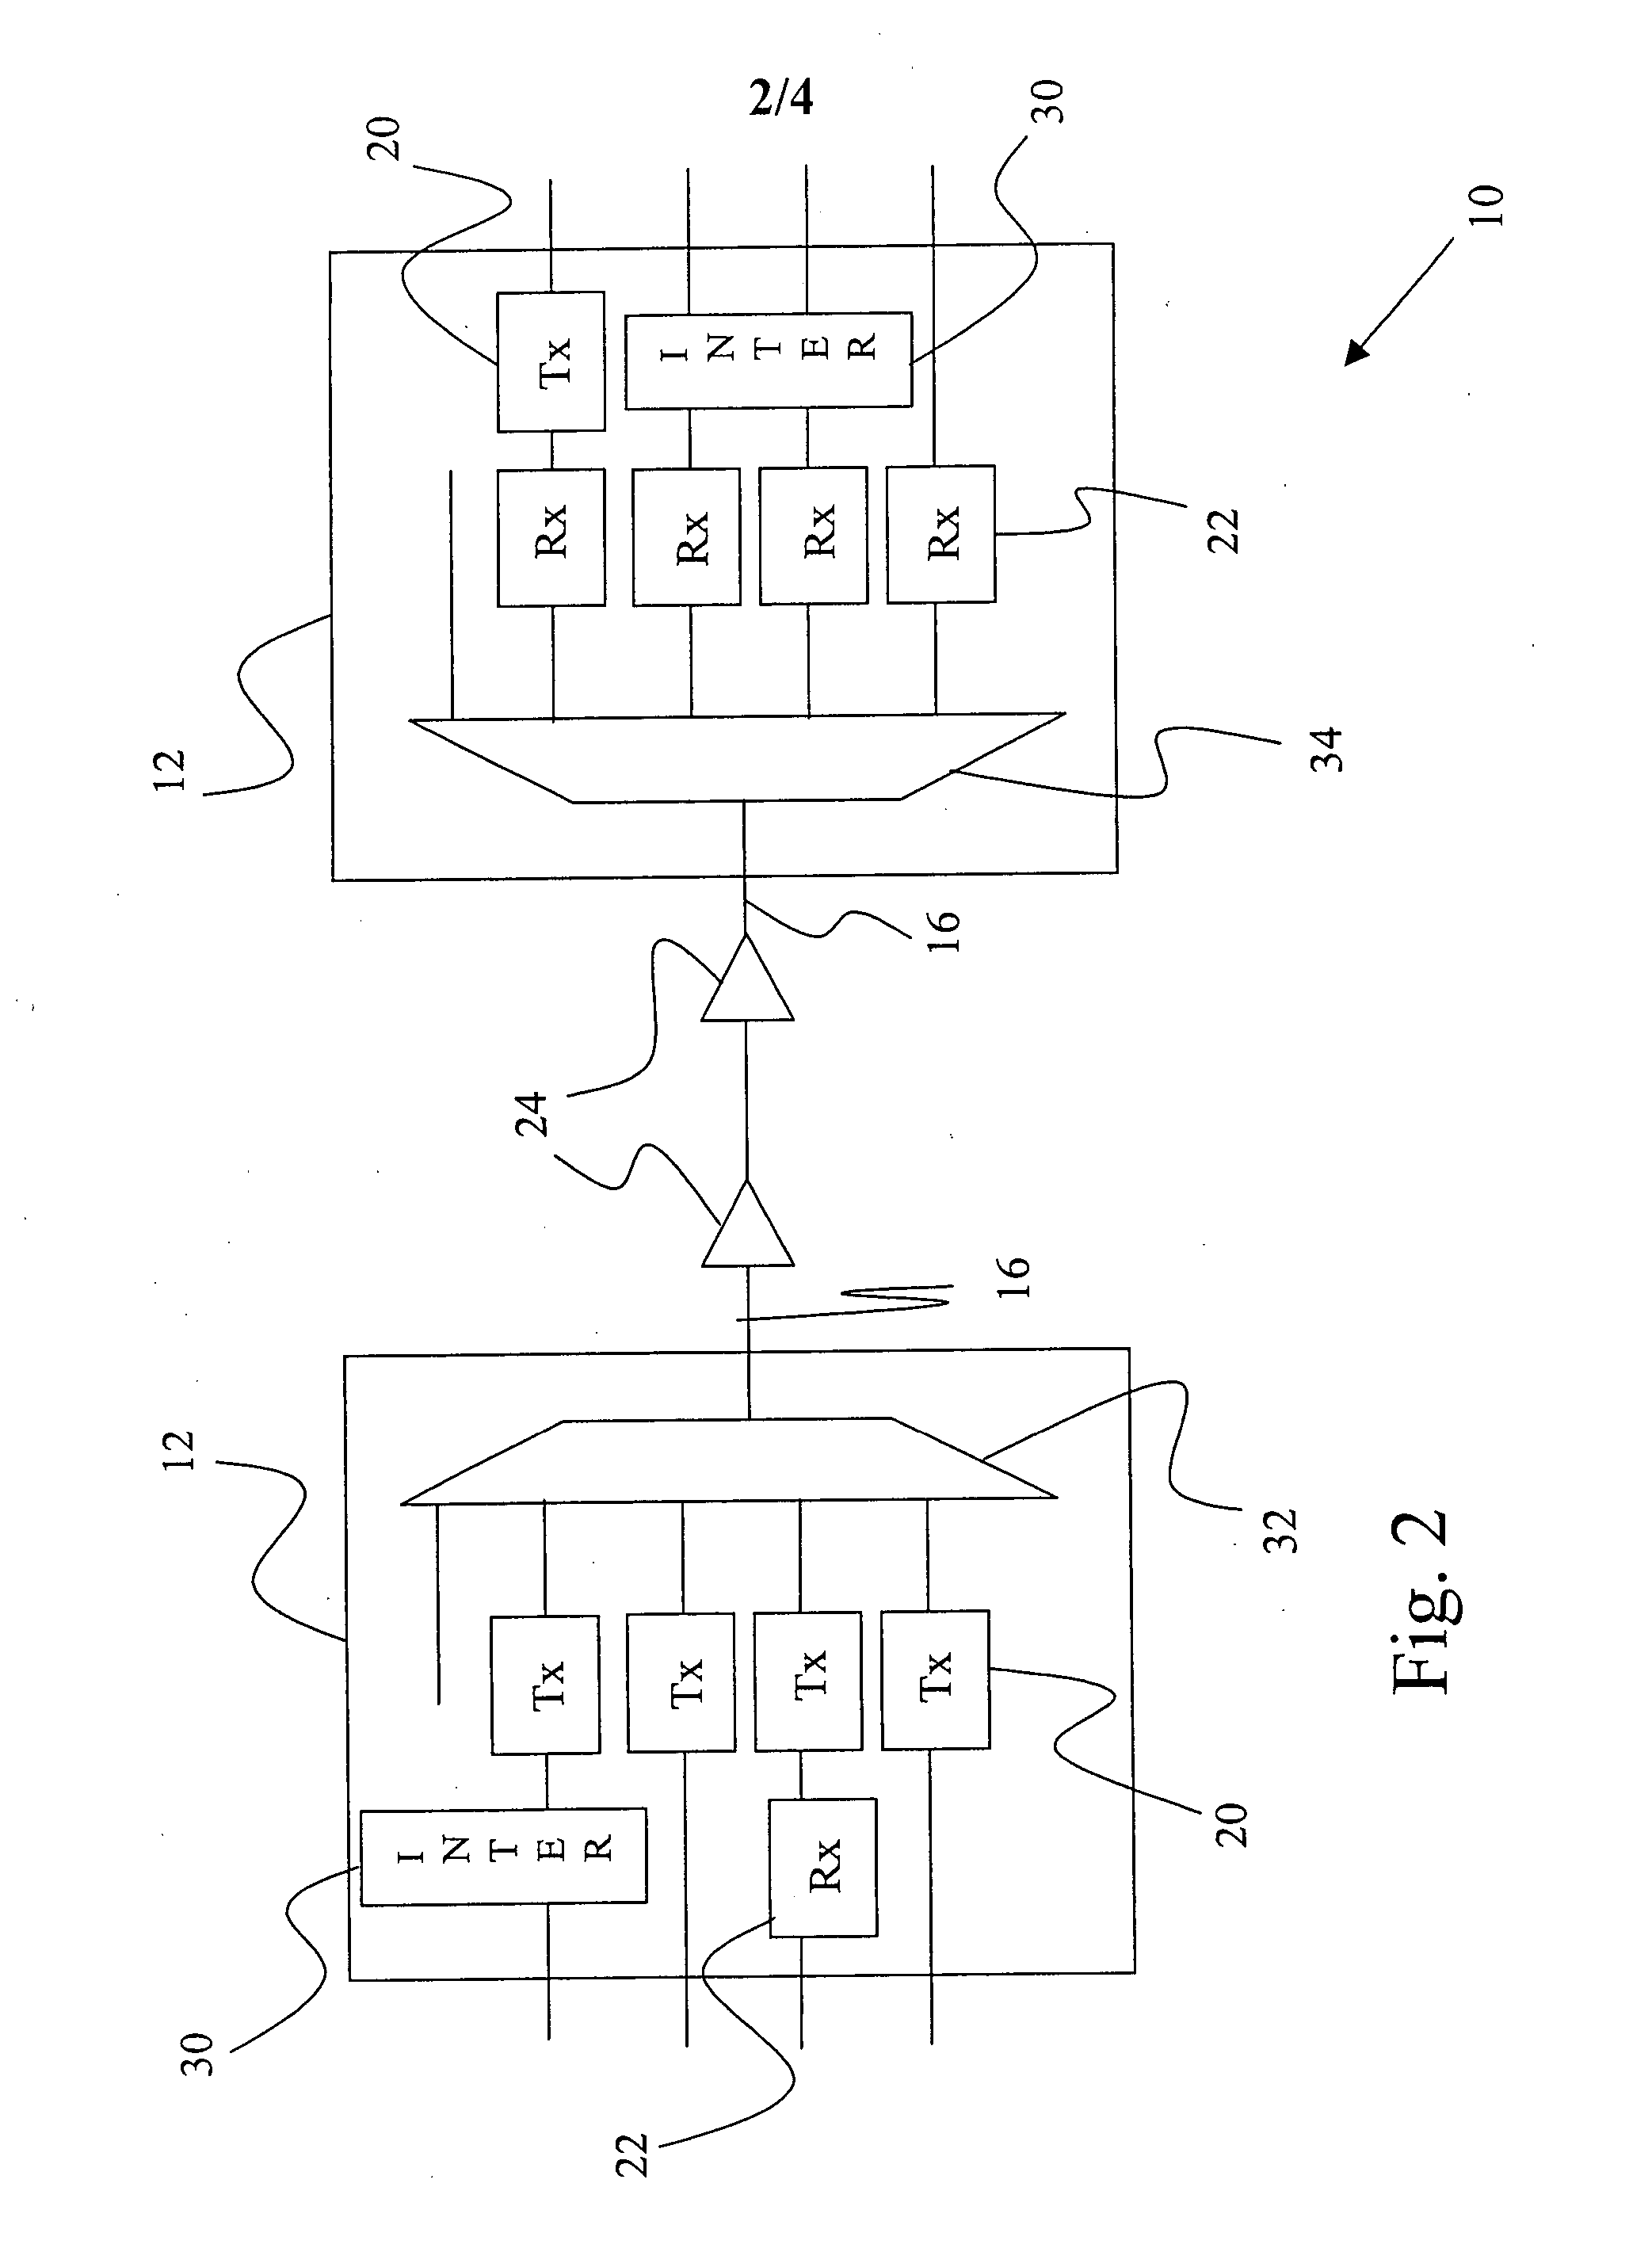 Optical communication systems including optical amplifiers an amplification methods